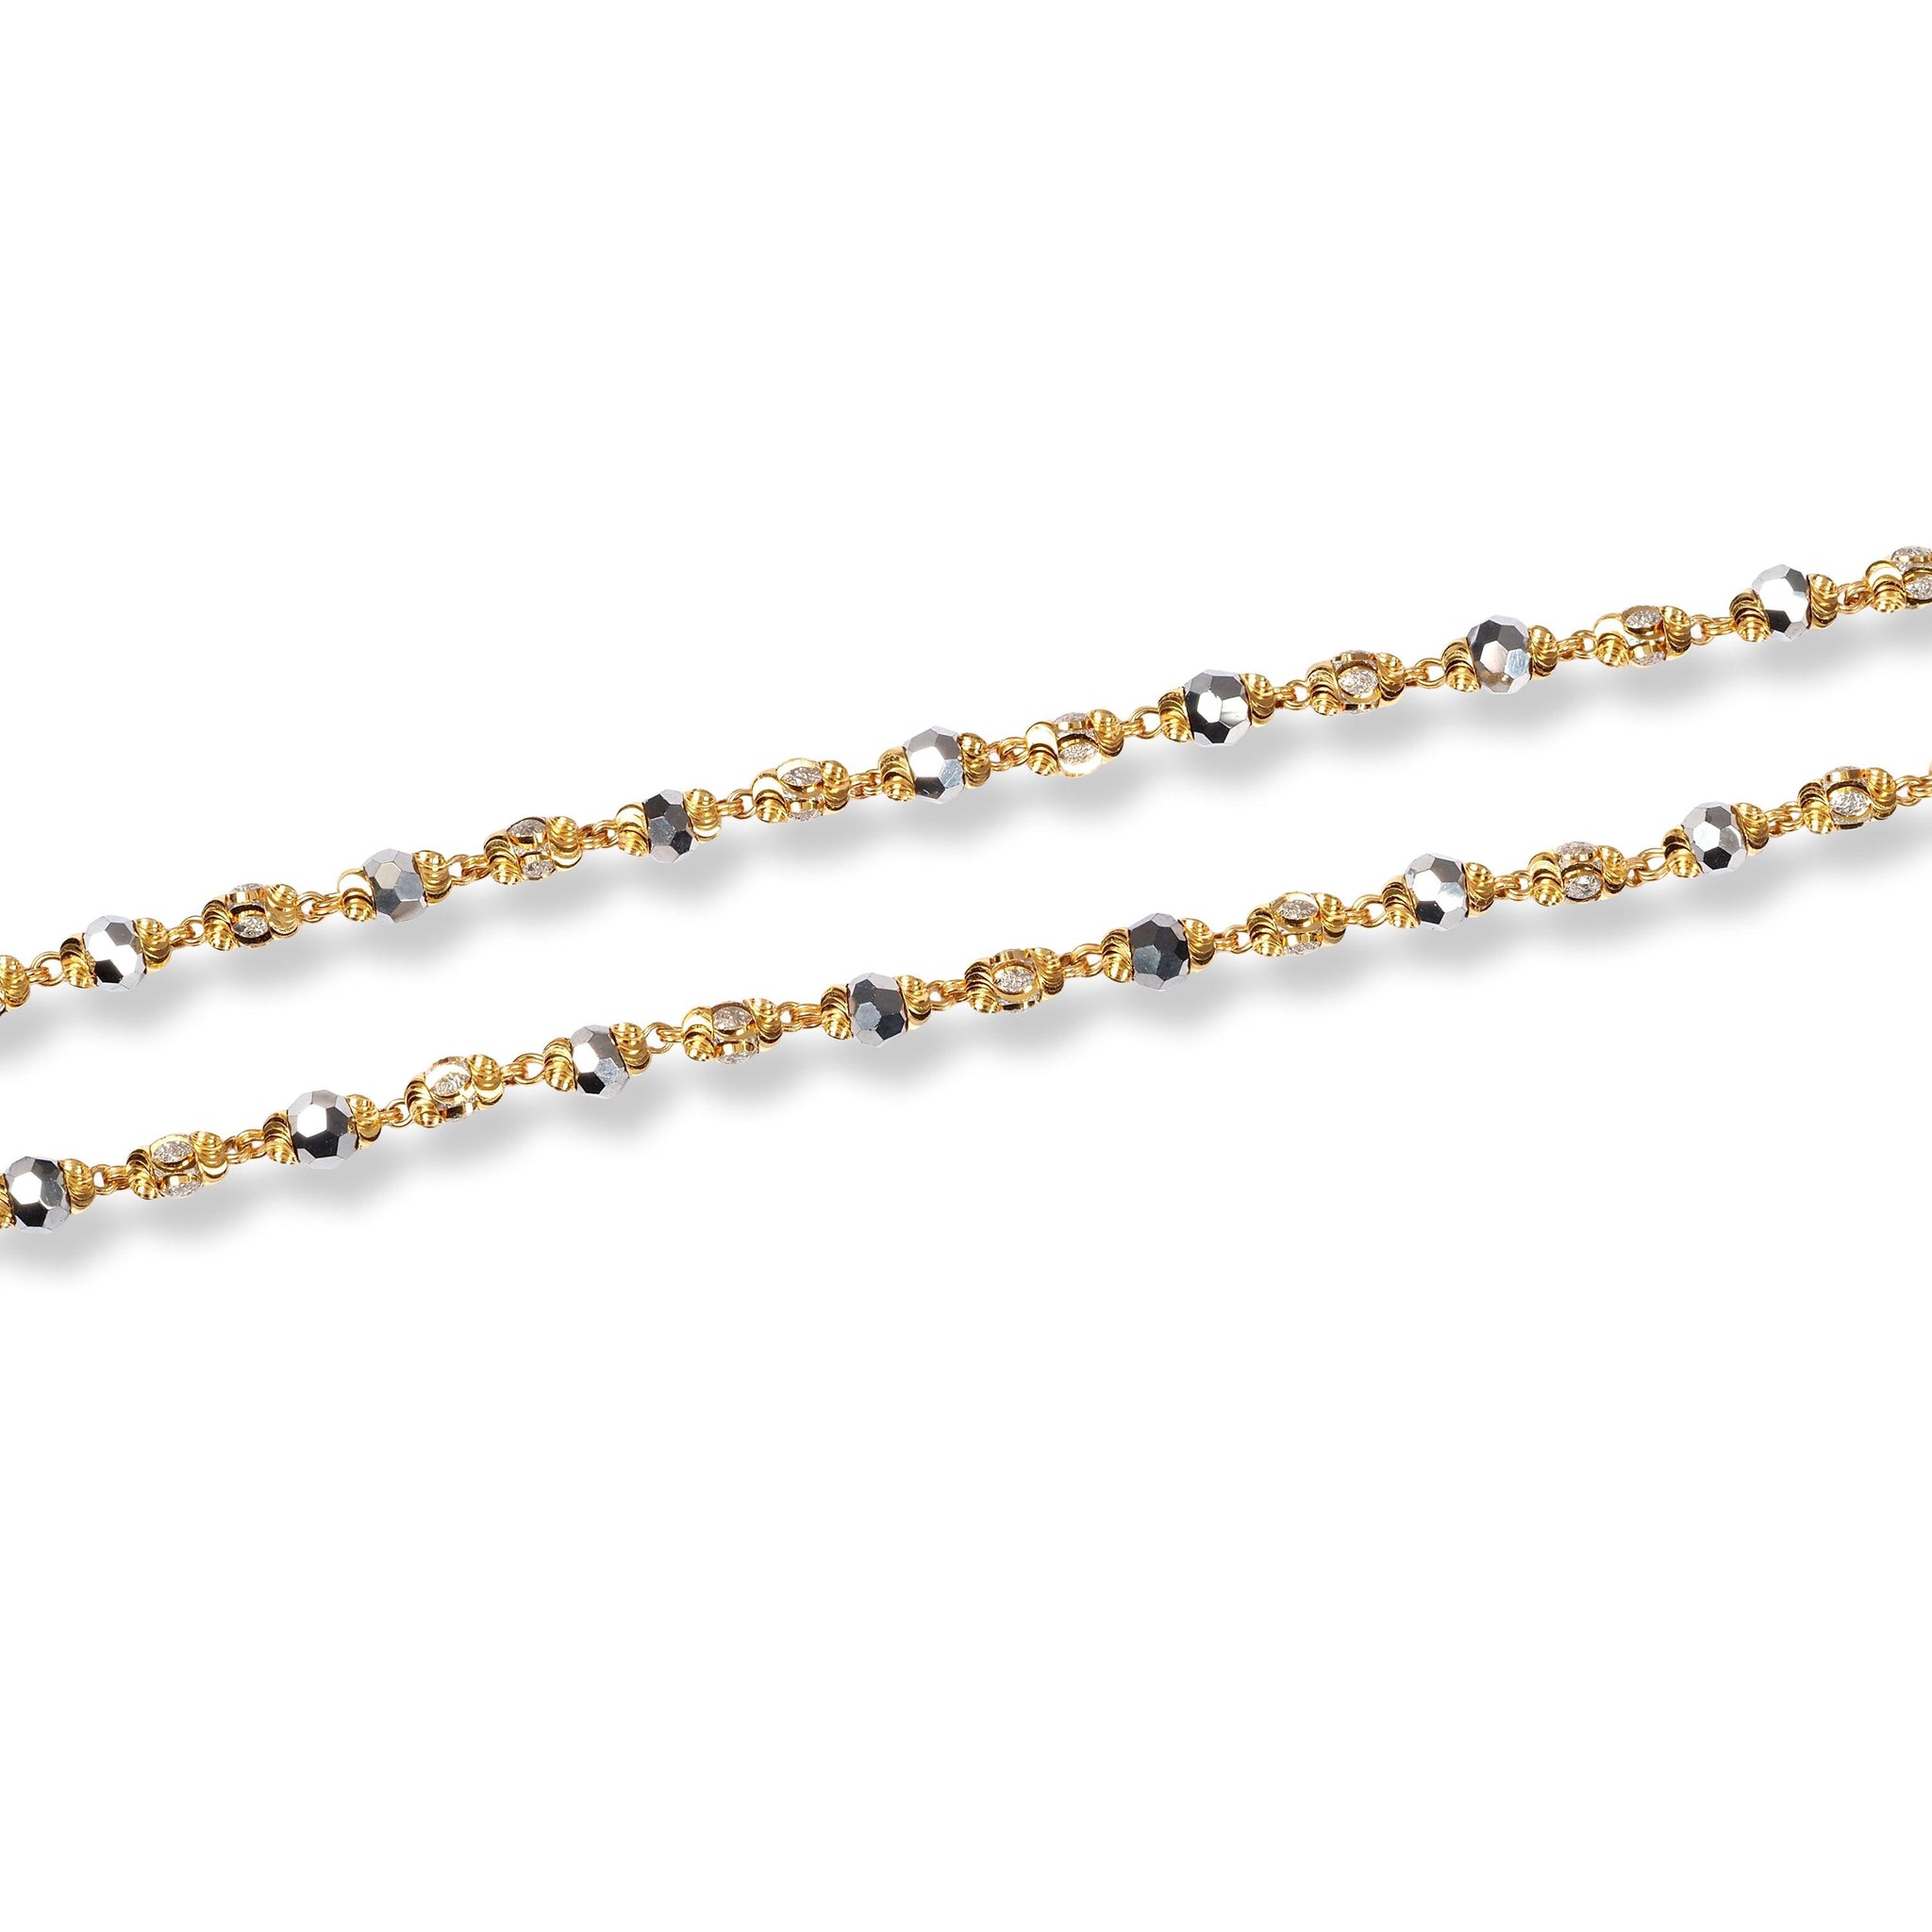 22ct Gold Children Bracelets with Rhodium Plated and Crystal Beads with S-Clasp CBR-8463